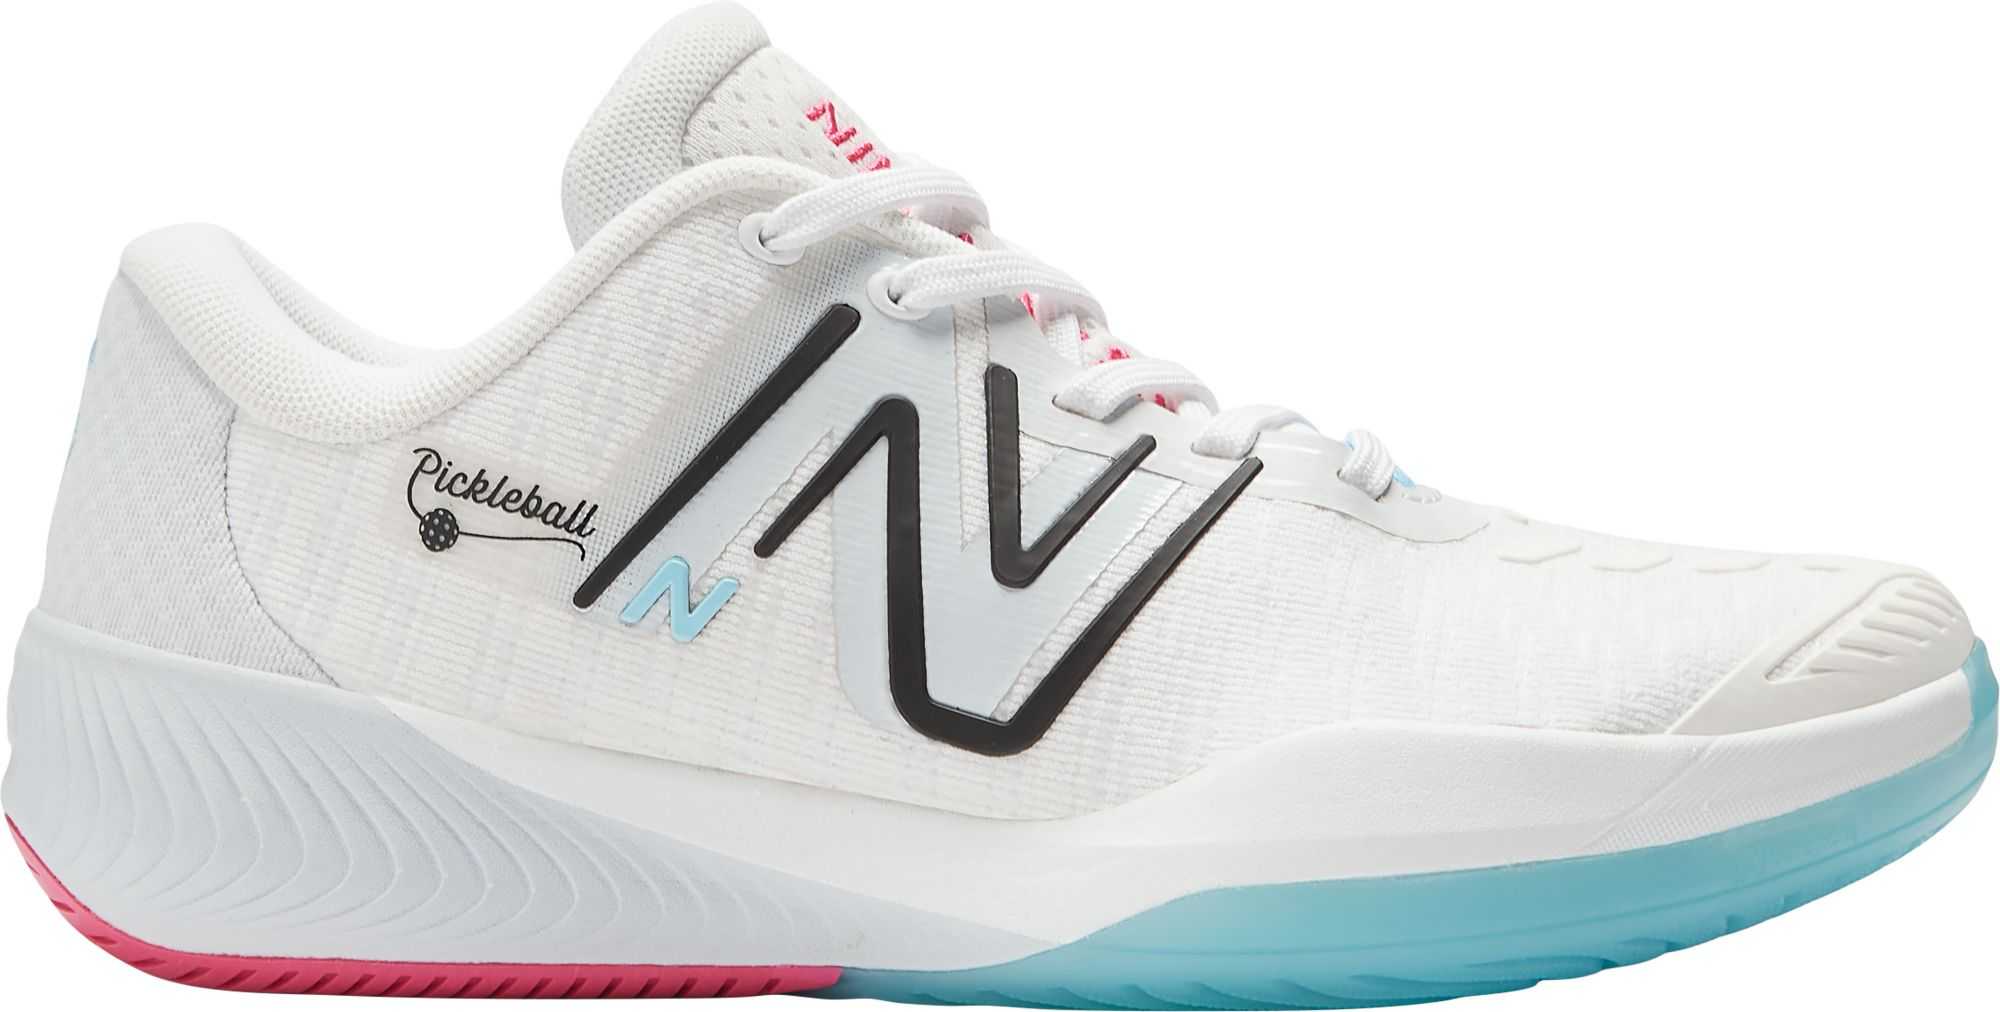 New Balance Women's Fuel Cell 996V5 Pickleball Shoes | Mother’s Day Gift